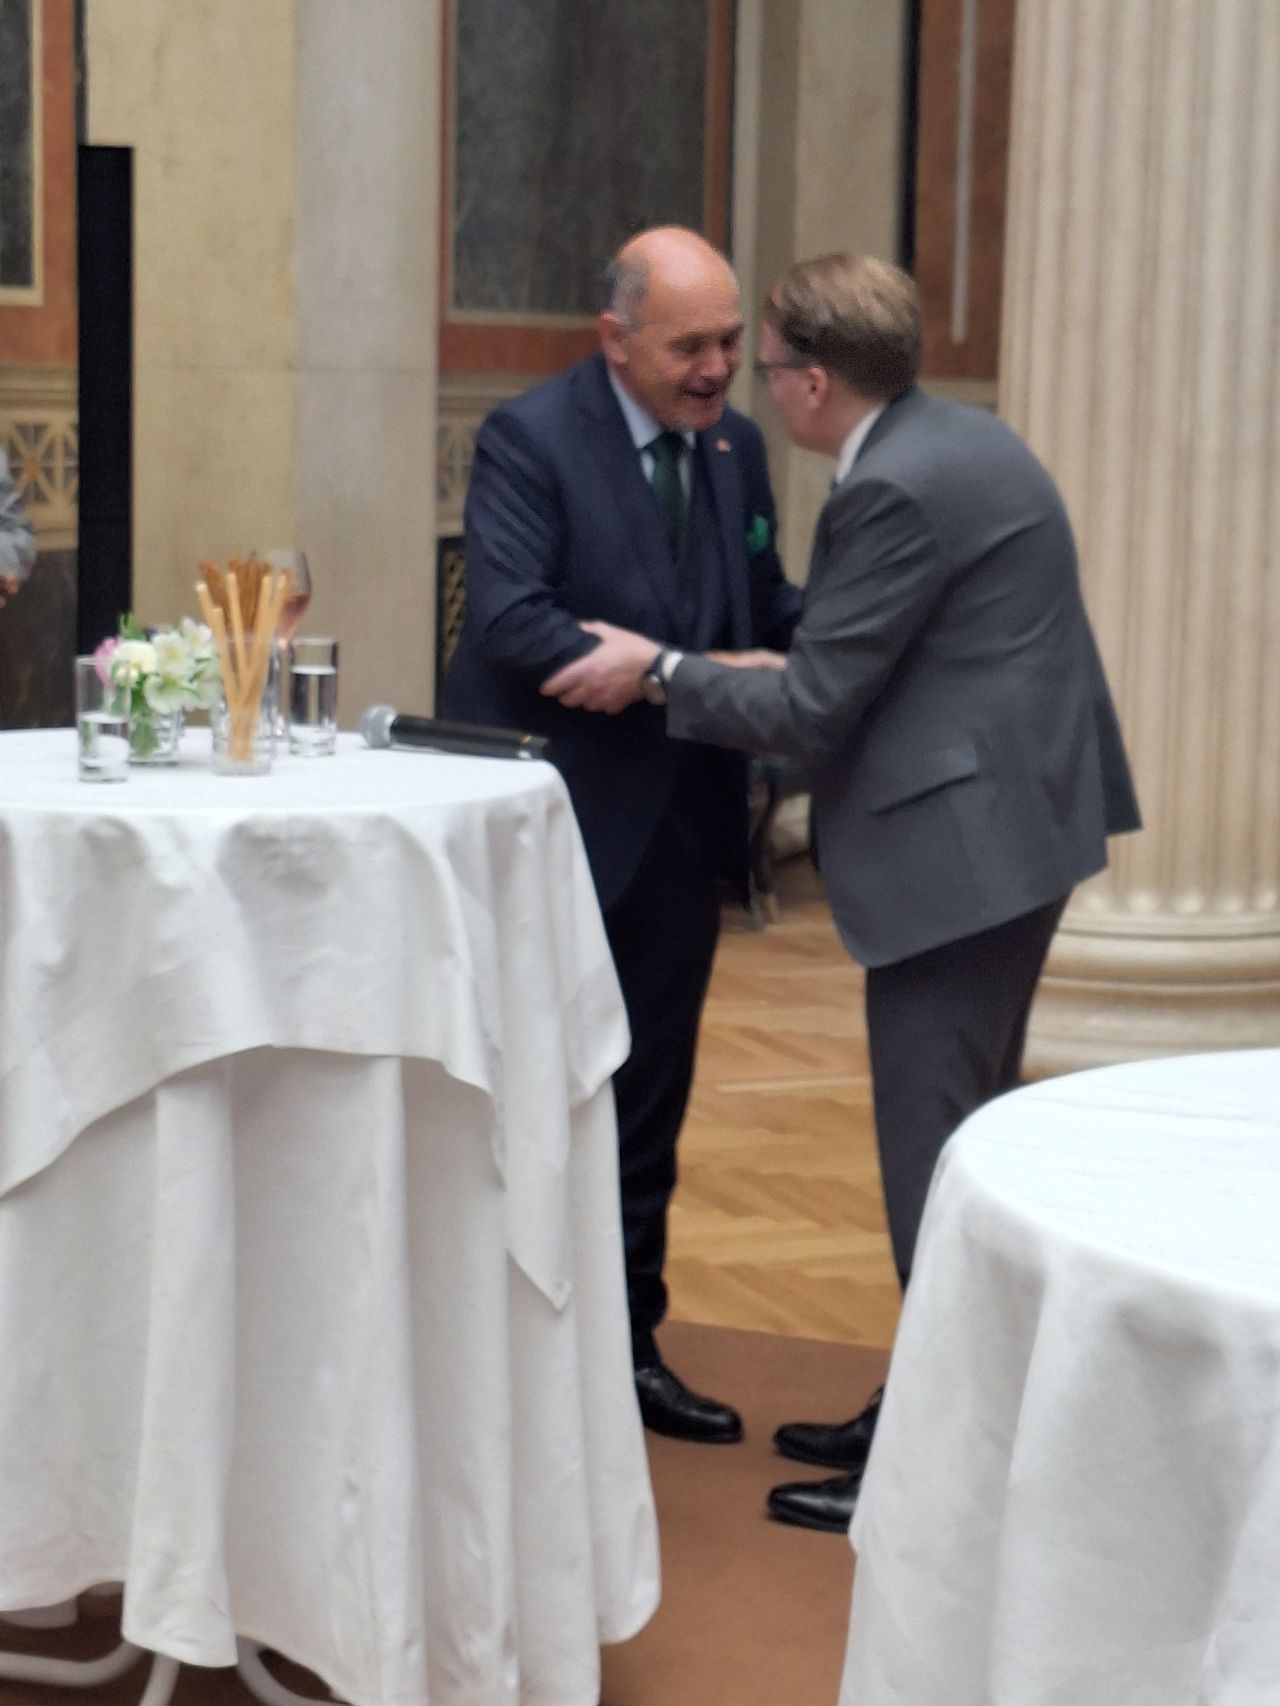 President of the Austrian National Council, His Excellency Mr Wolfgang Sobotka, welcoming IOI President, Chris Field PSM